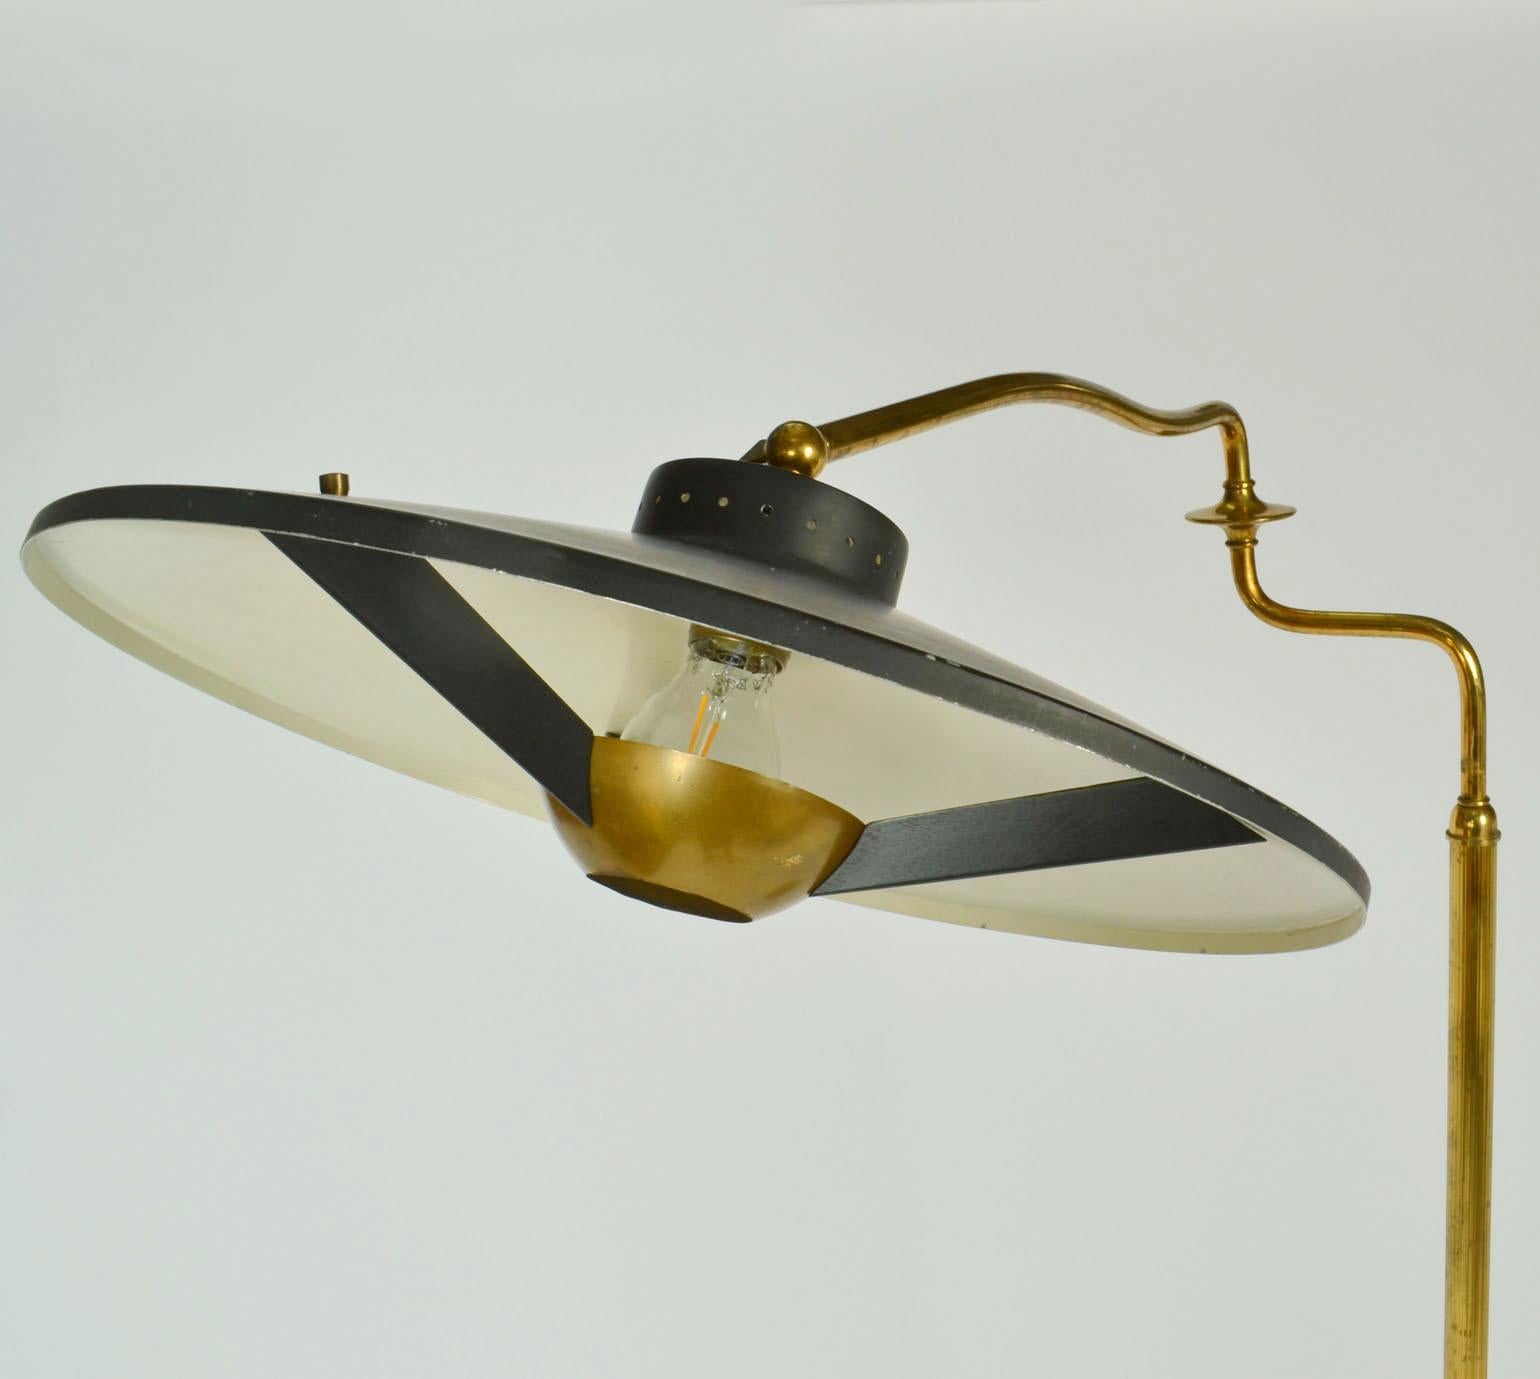 Italian Swing Arm Brass Floor Lamp, Original Black Shade, 1950's Stilnovo Style In Excellent Condition For Sale In London, GB